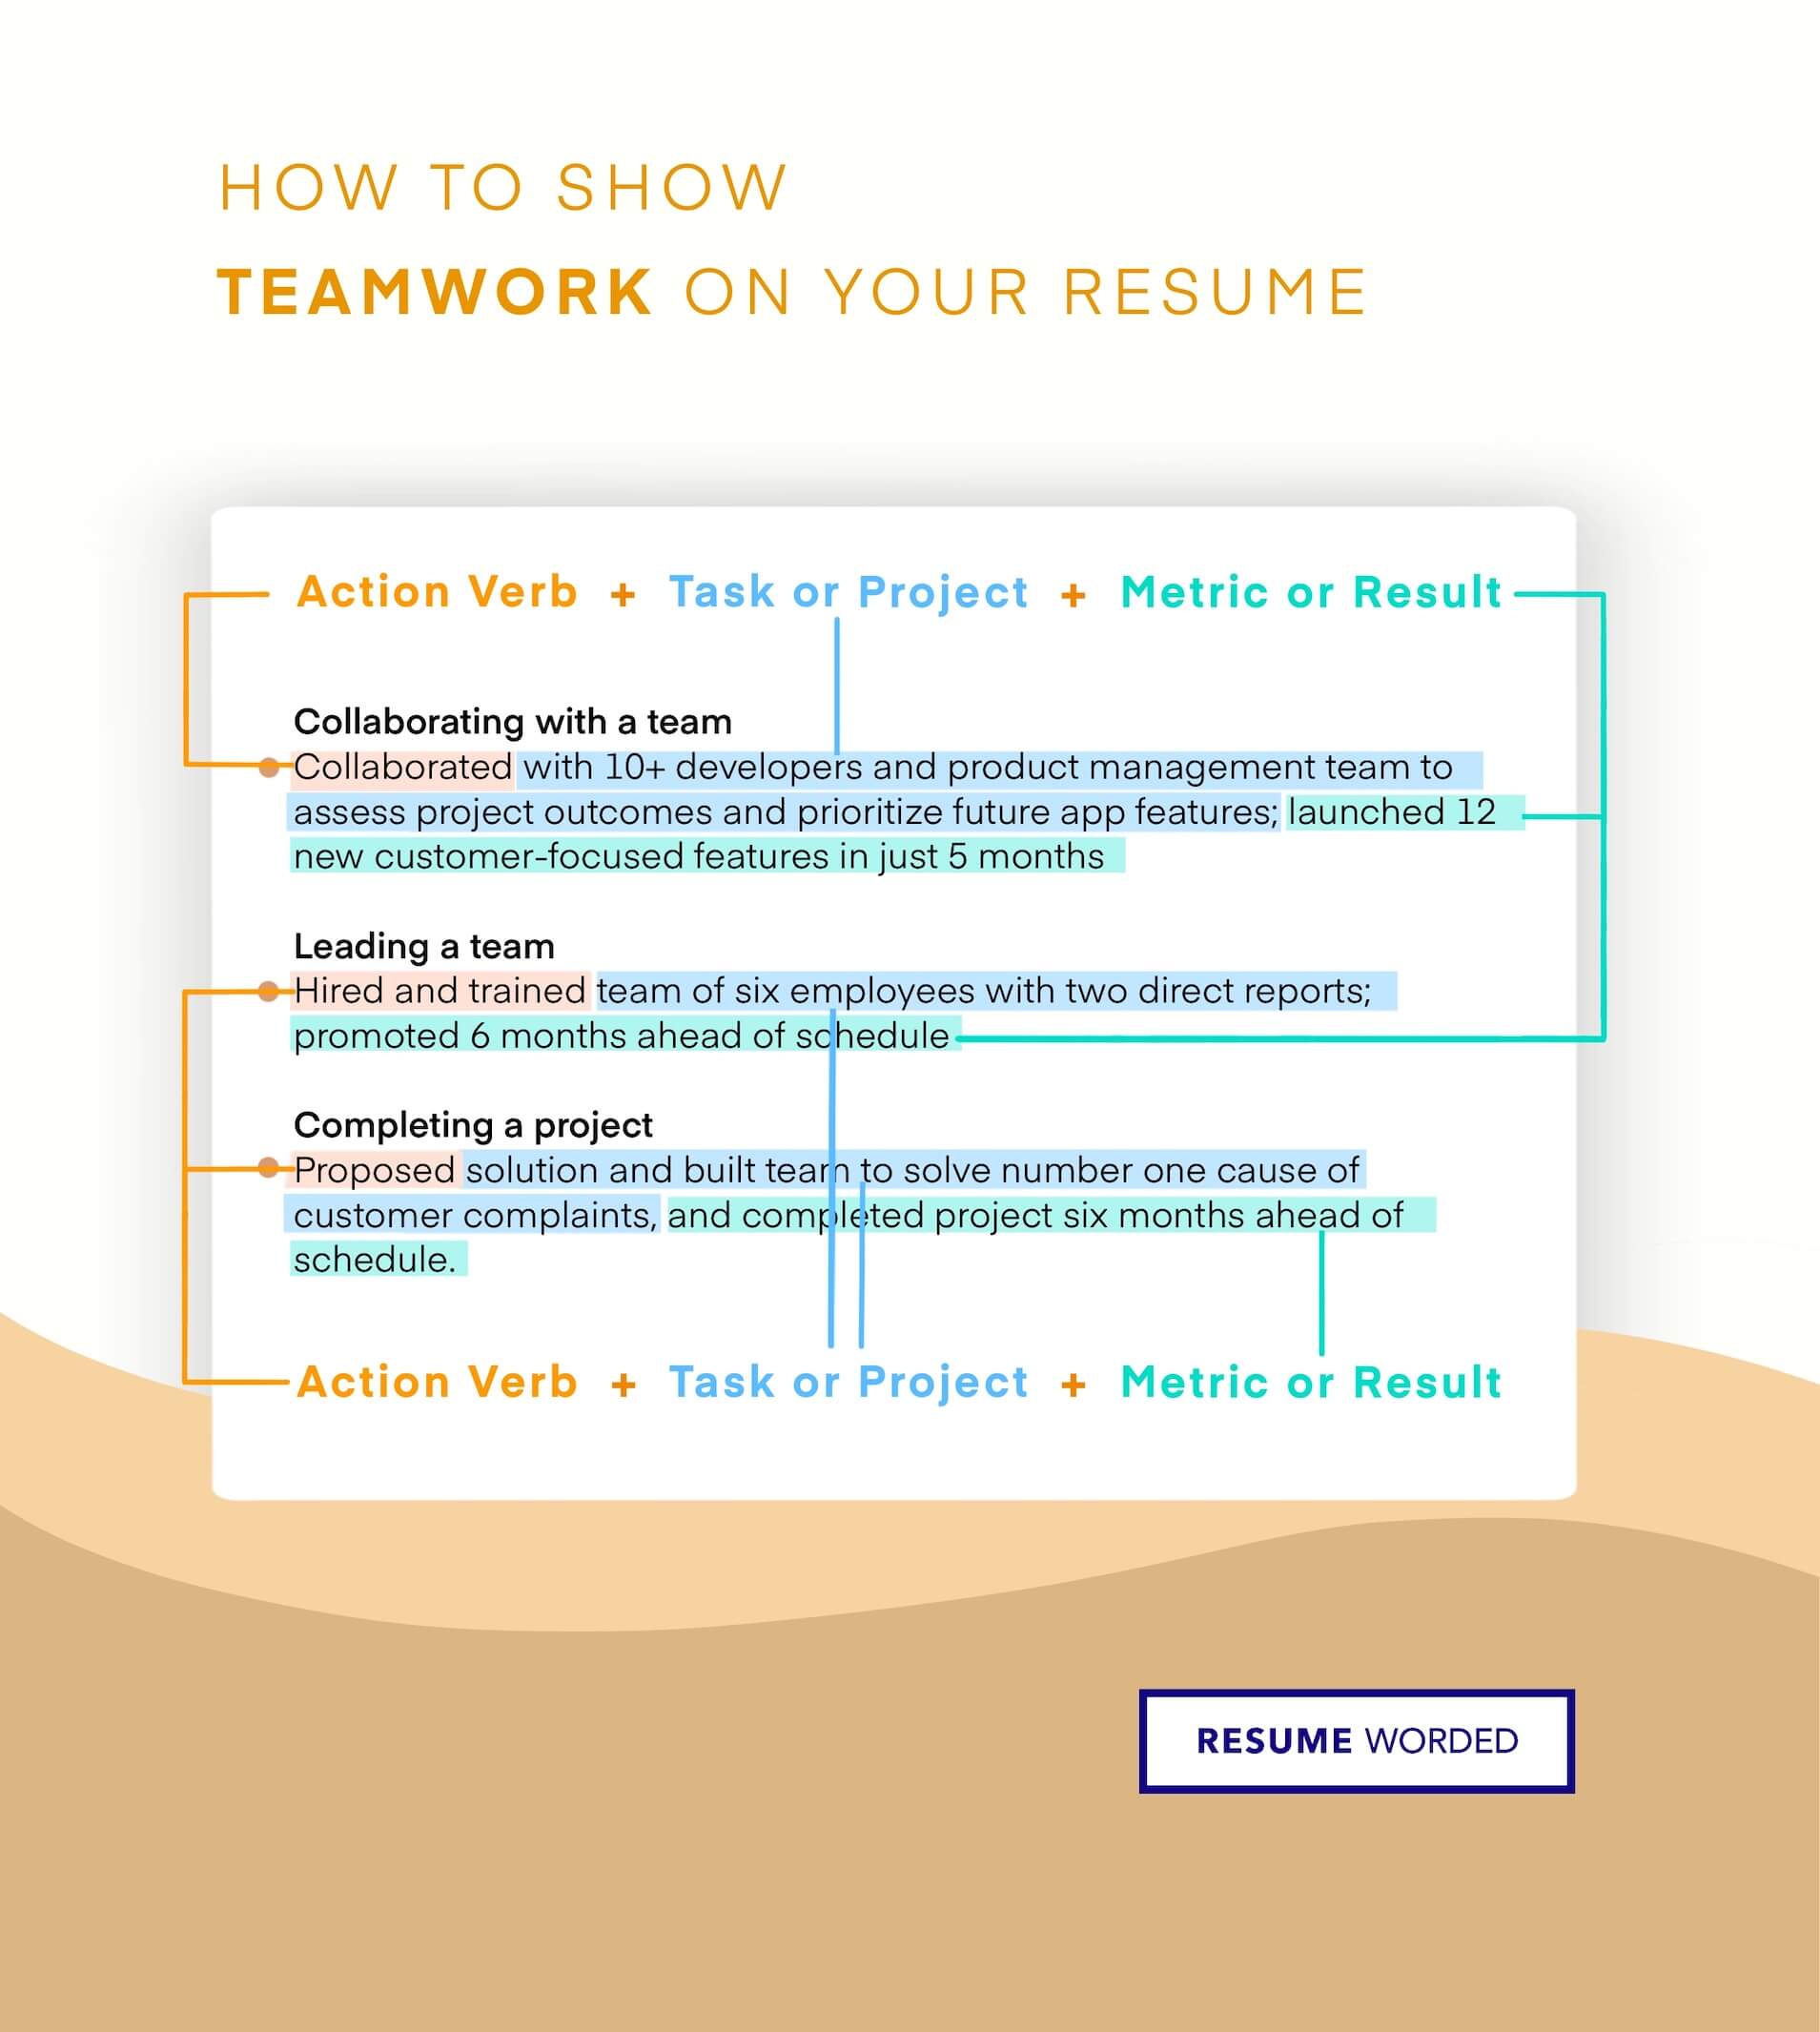 Emphasize your ability to collaborate cross-functionally - Senior Product Manager CV